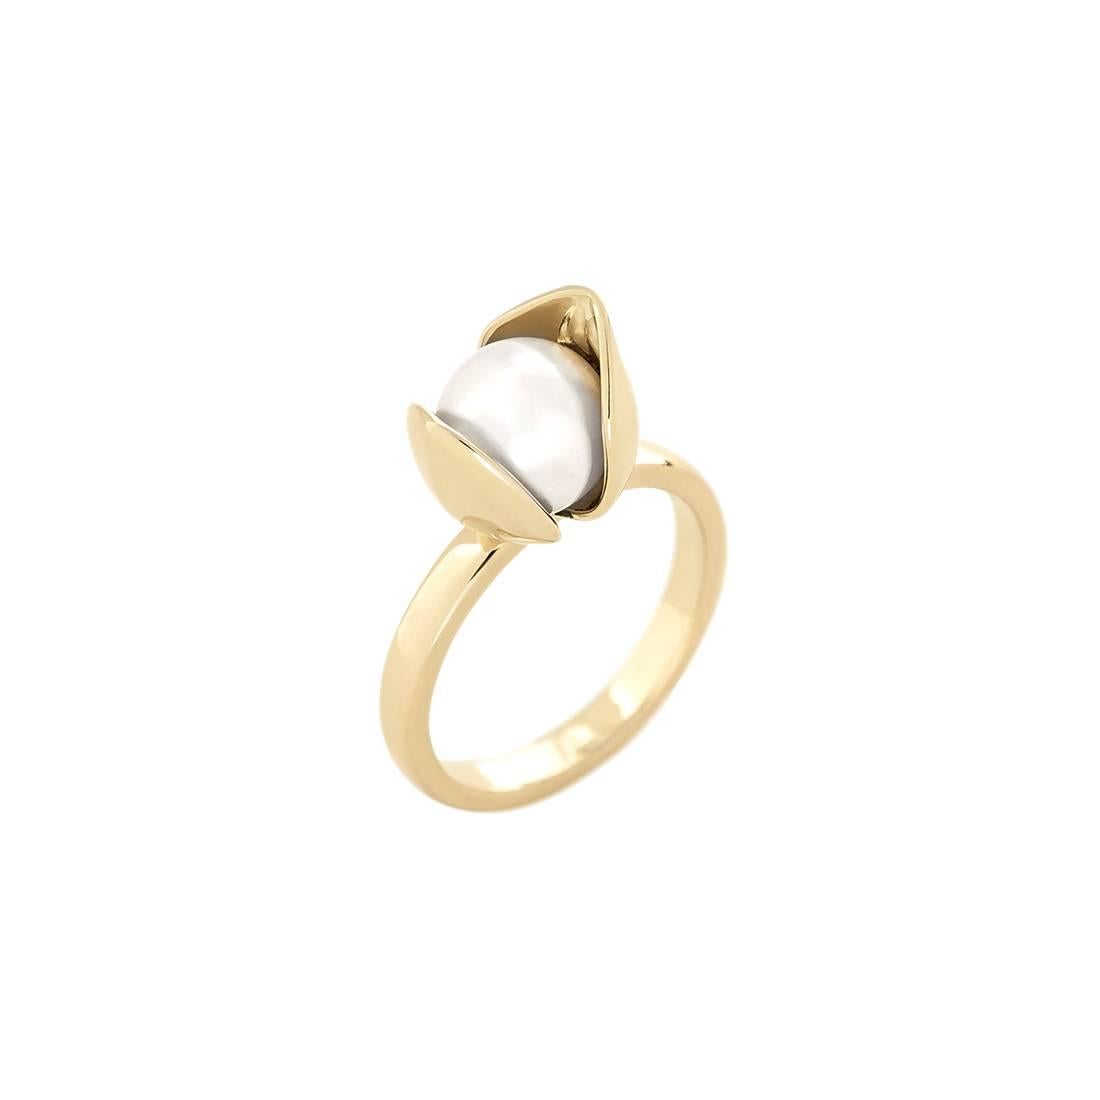 The Petite Orchid Ring is the perfect easy-luxe accessory, guaranteed to add a touch of luxury sparkle to any ensemble. Its versatile design allows it to be paired easily with other gold or pearl jewellery, making it the ultimate all-rounder piece.